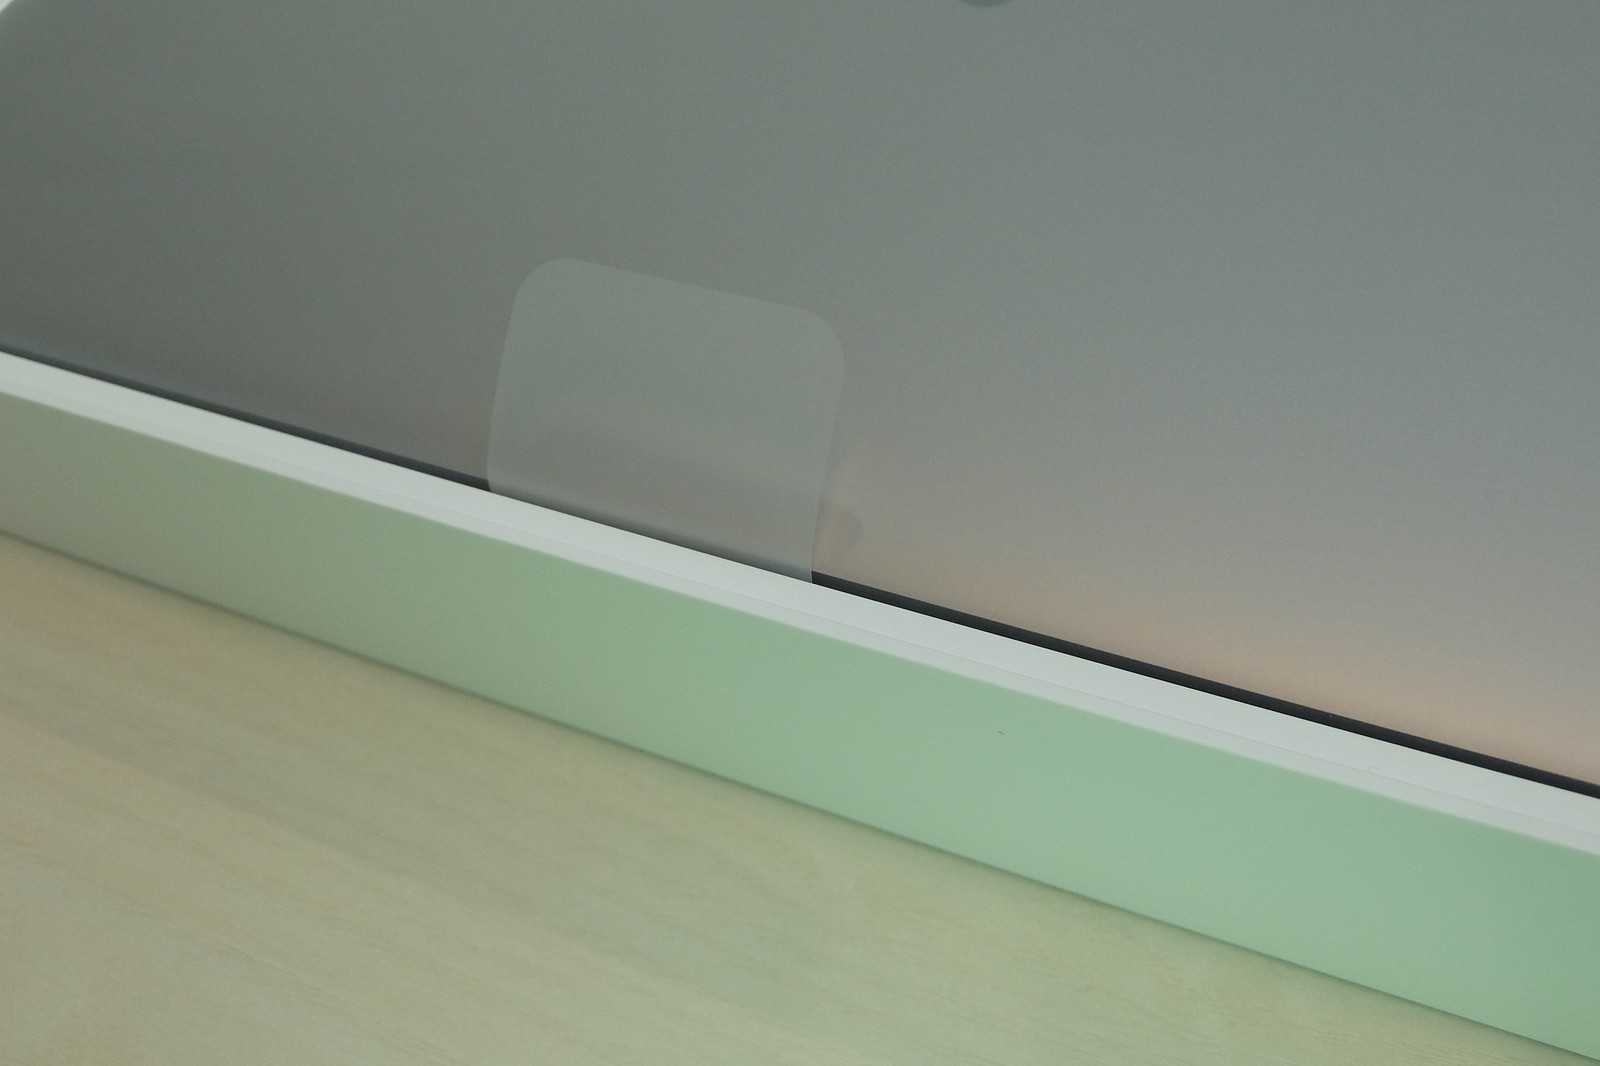 Detail of MacBook Pro (Late 2016)